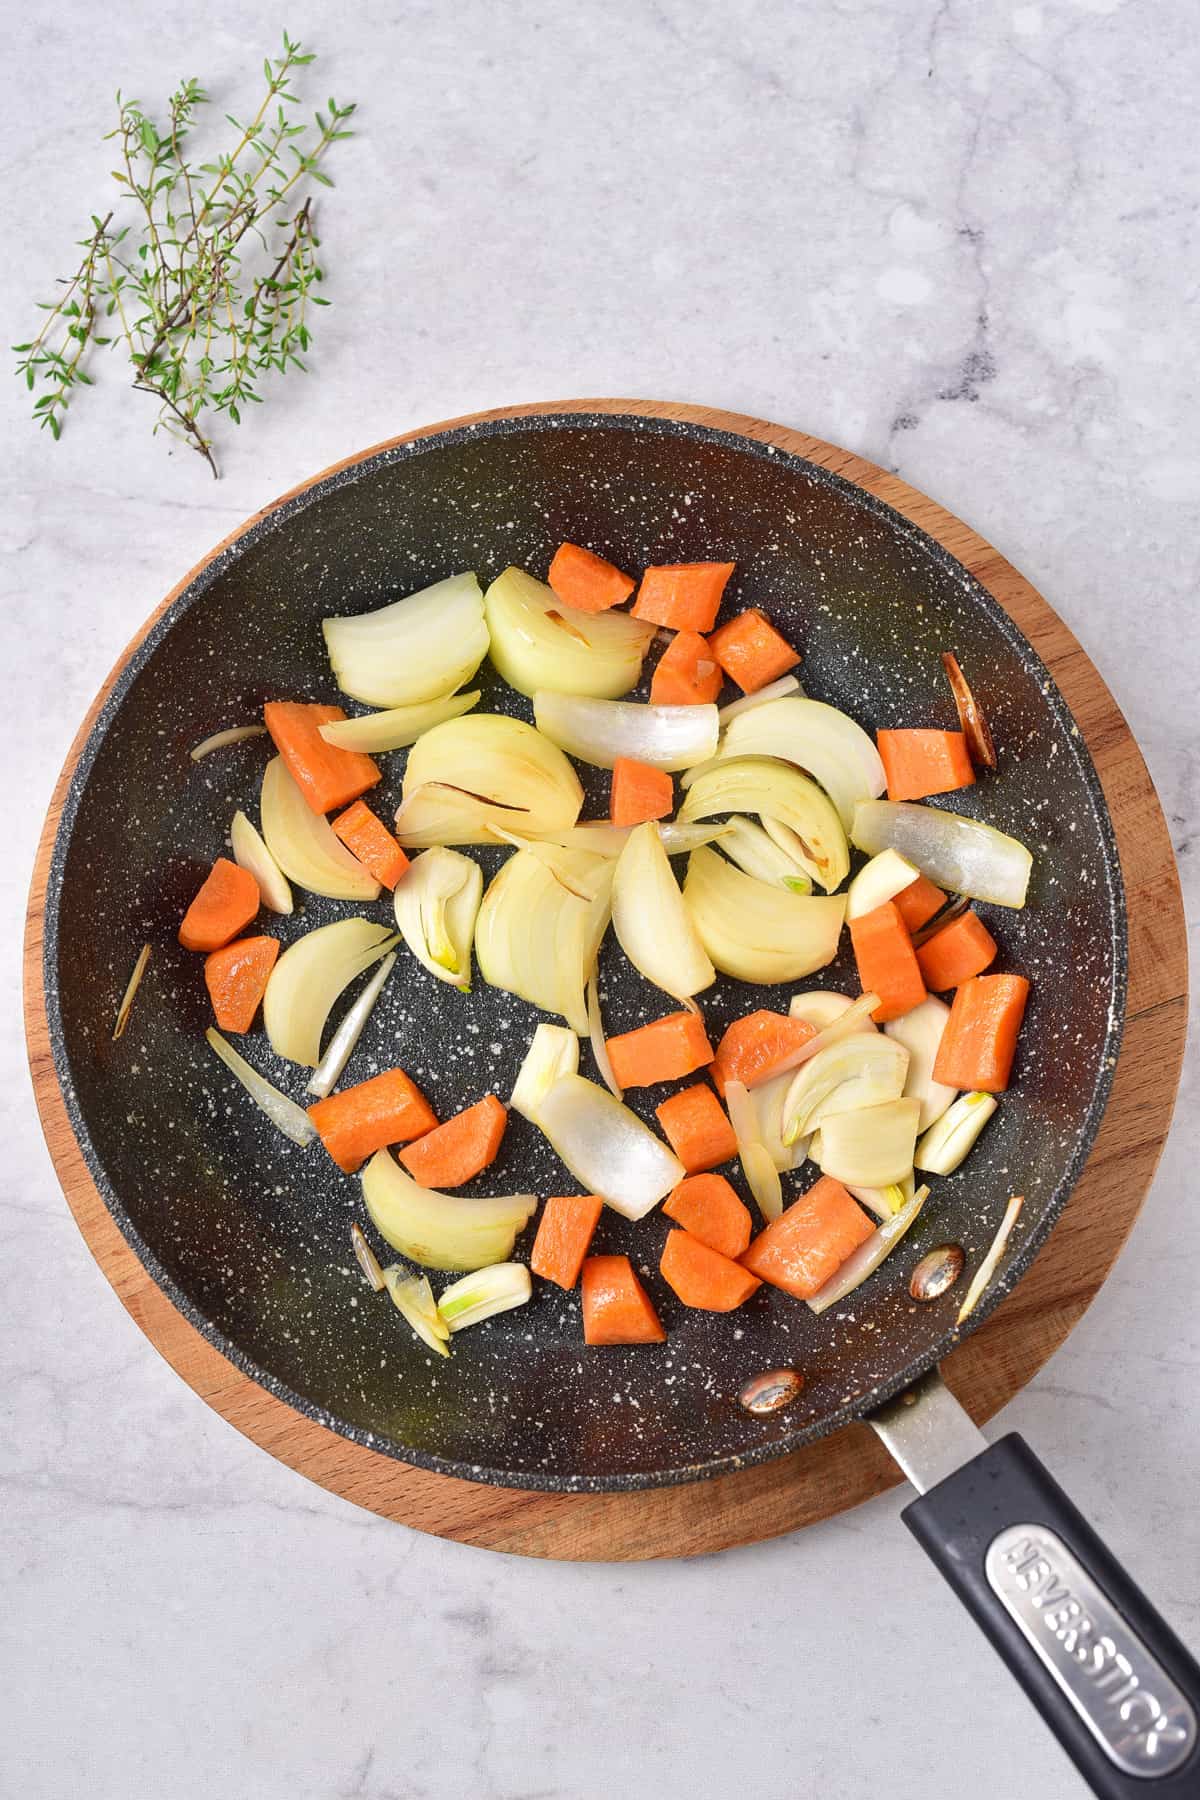 Cooking onions and carrots in a skillet.